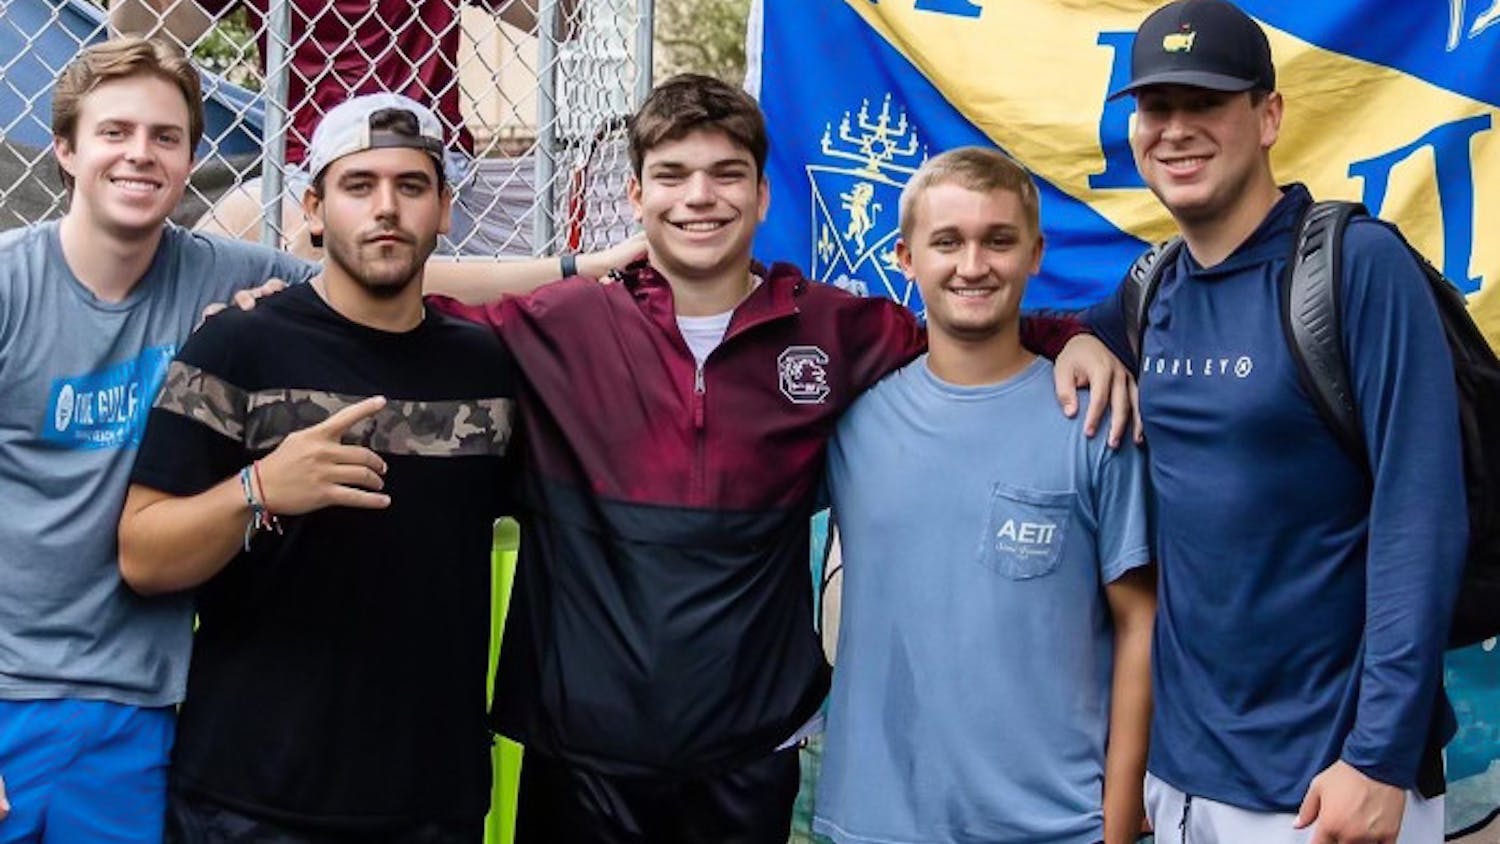 Alpha Epsilon Pi (AEPi) developed "Good and Welfare" to support mental health for members of the fraternity.